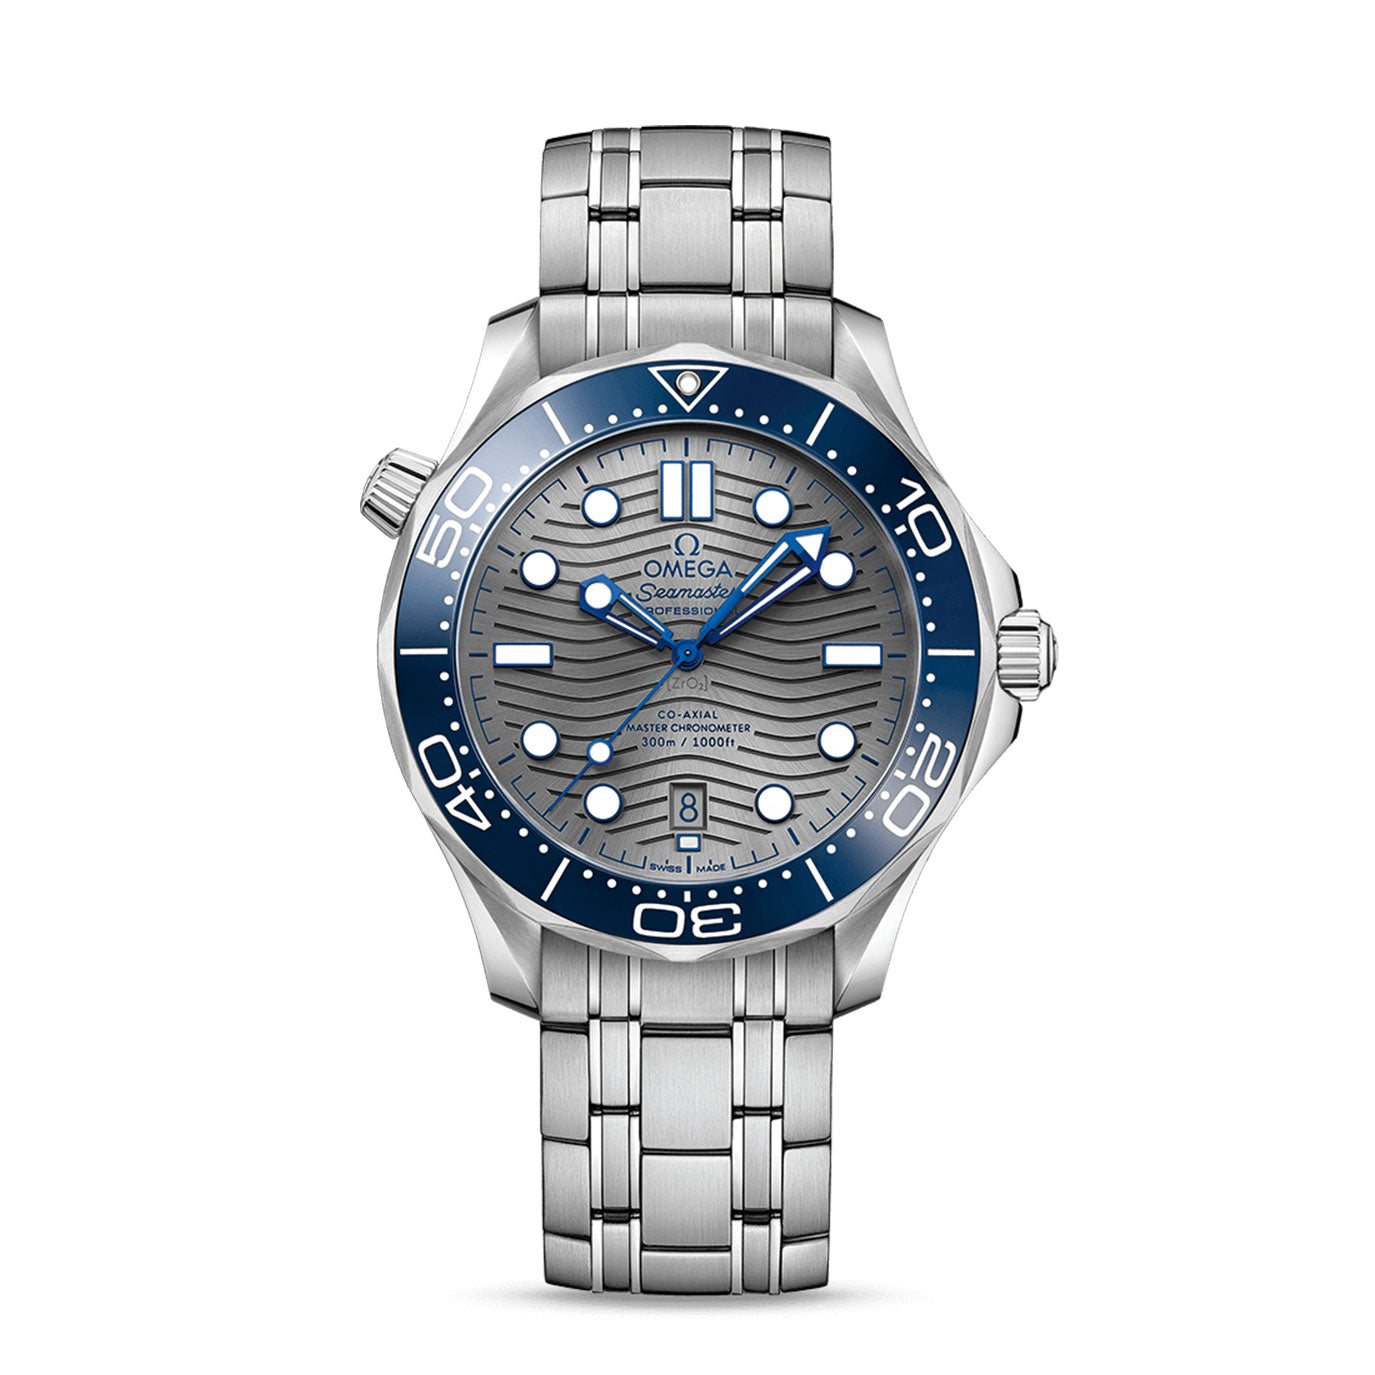 Omega Seamaster DIVER 300M CO‑AXIAL MASTER CHRONOMETER Ref# 210.30.42.20.06.001